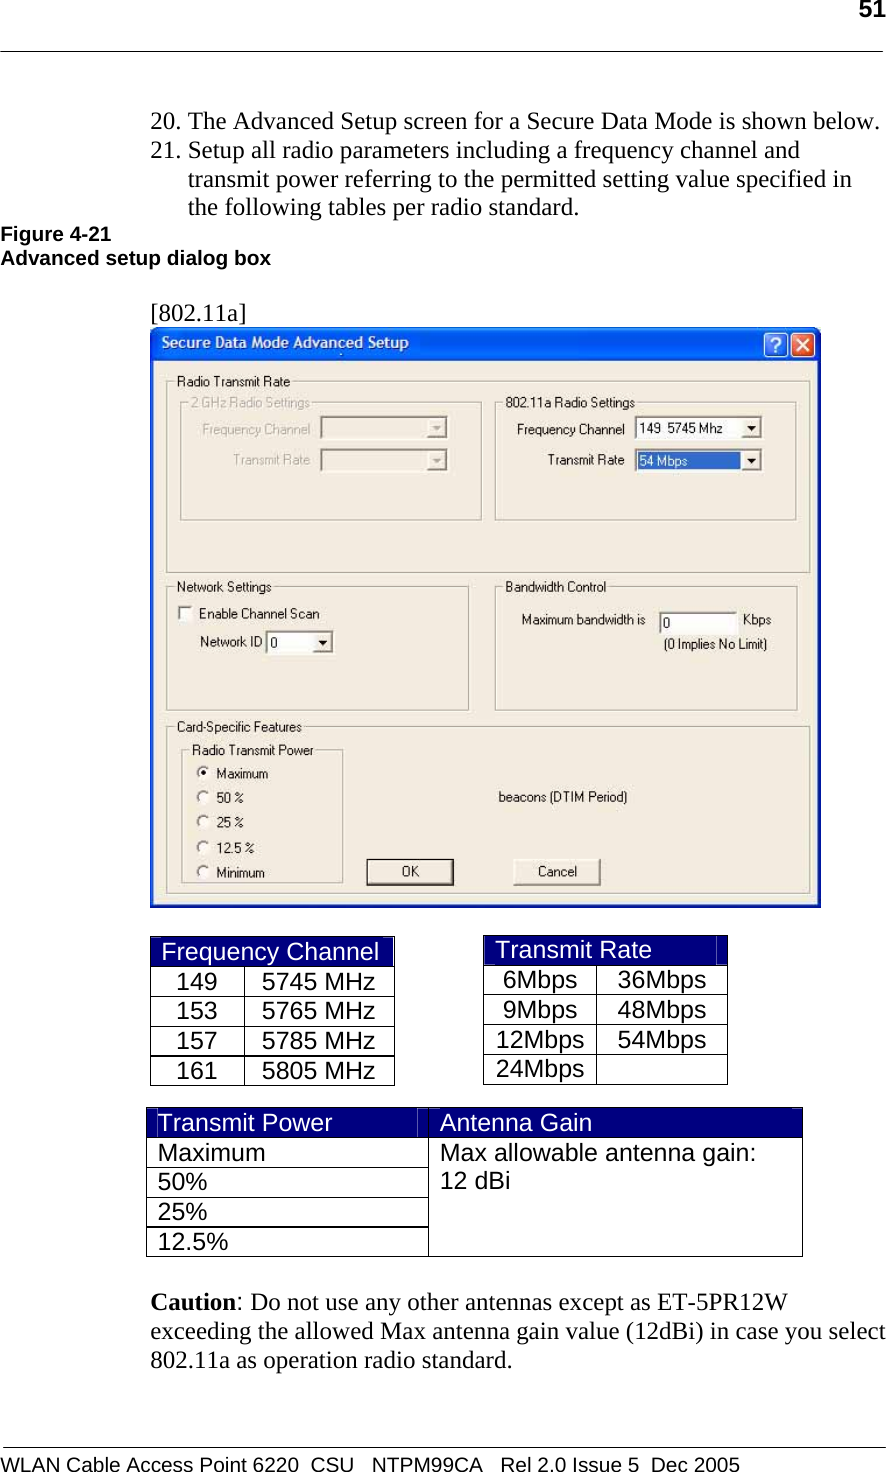   51  WLAN Cable Access Point 6220  CSU   NTPM99CA   Rel 2.0 Issue 5  Dec 2005 20. The Advanced Setup screen for a Secure Data Mode is shown below. 21. Setup all radio parameters including a frequency channel and transmit power referring to the permitted setting value specified in the following tables per radio standard.  Figure 4-21 Advanced setup dialog box  [802.11a]   Frequency Channel149 5745 MHz153 5765 MHz157 5785 MHz161 5805 MHz       Caution: Do not use any other antennas except as ET-5PR12W exceeding the allowed Max antenna gain value (12dBi) in case you select 802.11a as operation radio standard.  Transmit Rate 6Mbps 36Mbps 9Mbps 48Mbps 12Mbps 54Mbps 24Mbps  Transmit Power  Antenna Gain Maximum 50% 25% 12.5% Max allowable antenna gain:  12 dBi    